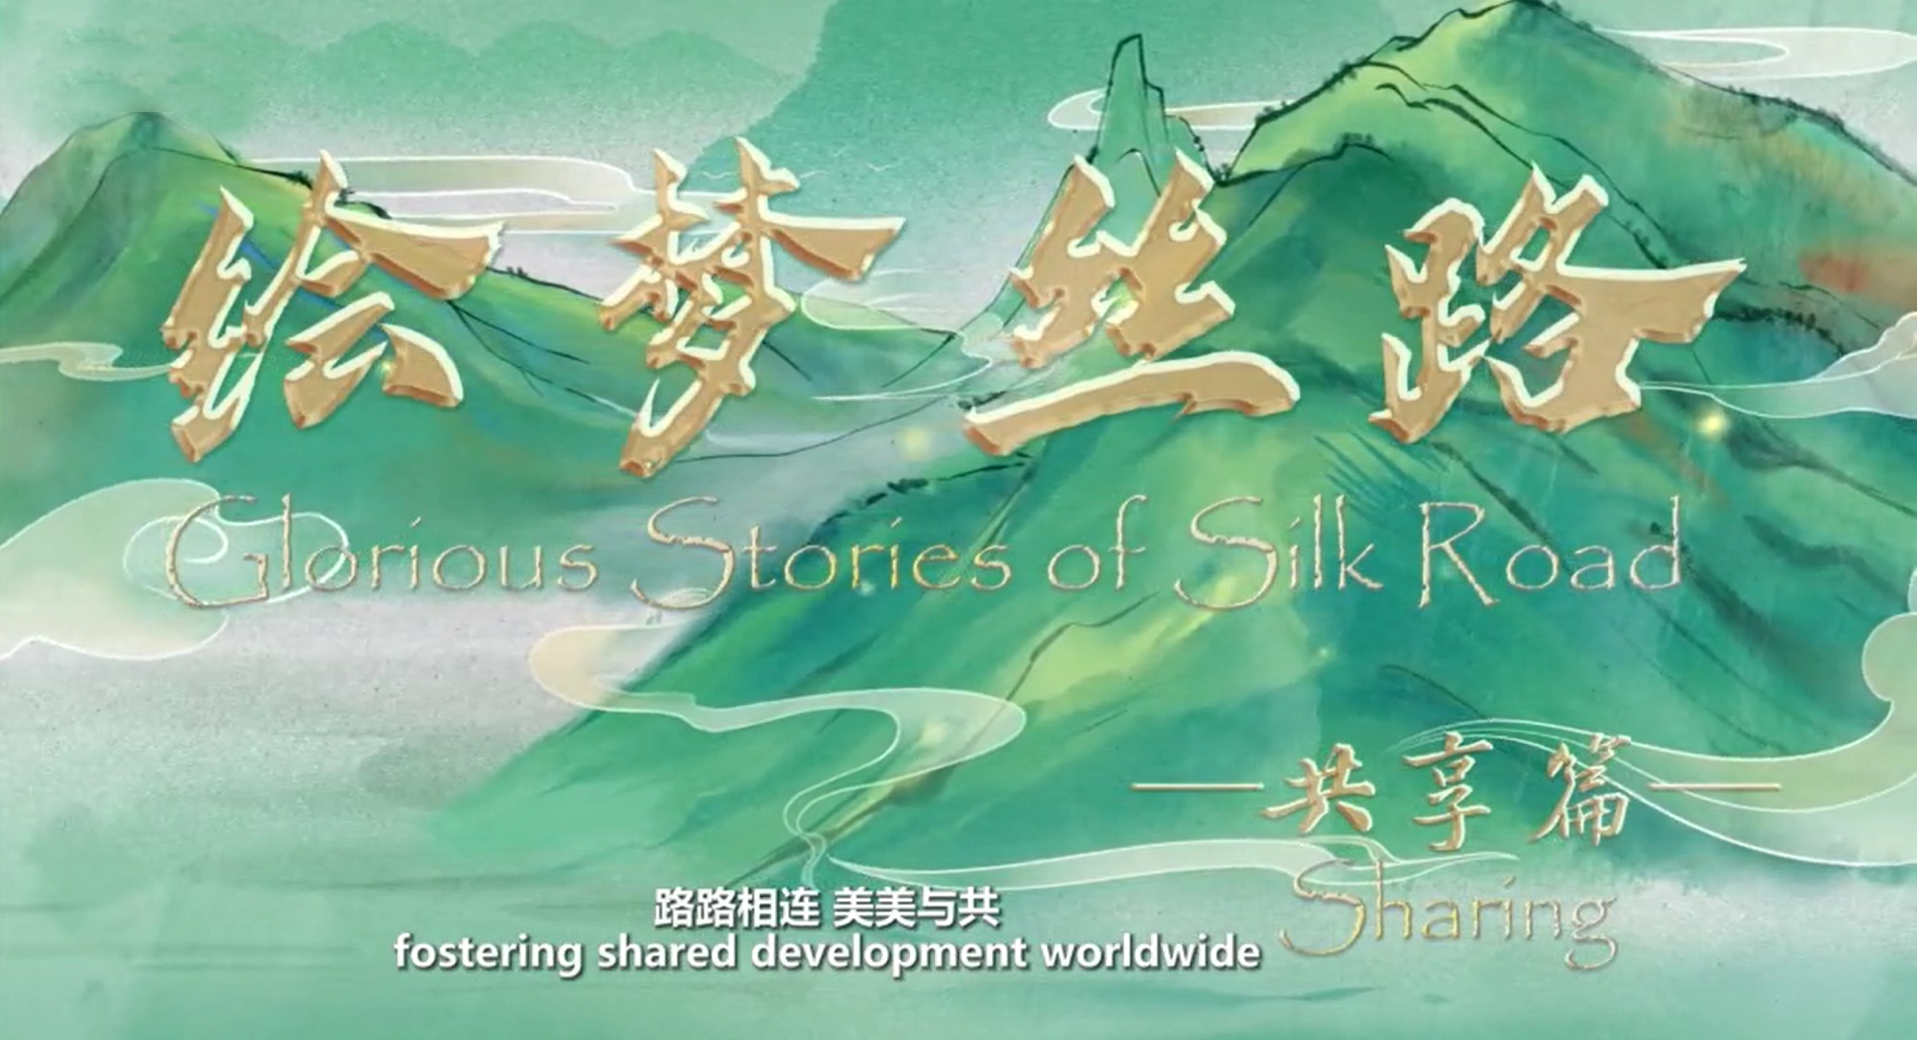 Glorious stories of Silk Road: China-Europe freight trains foster global ties for shared growth